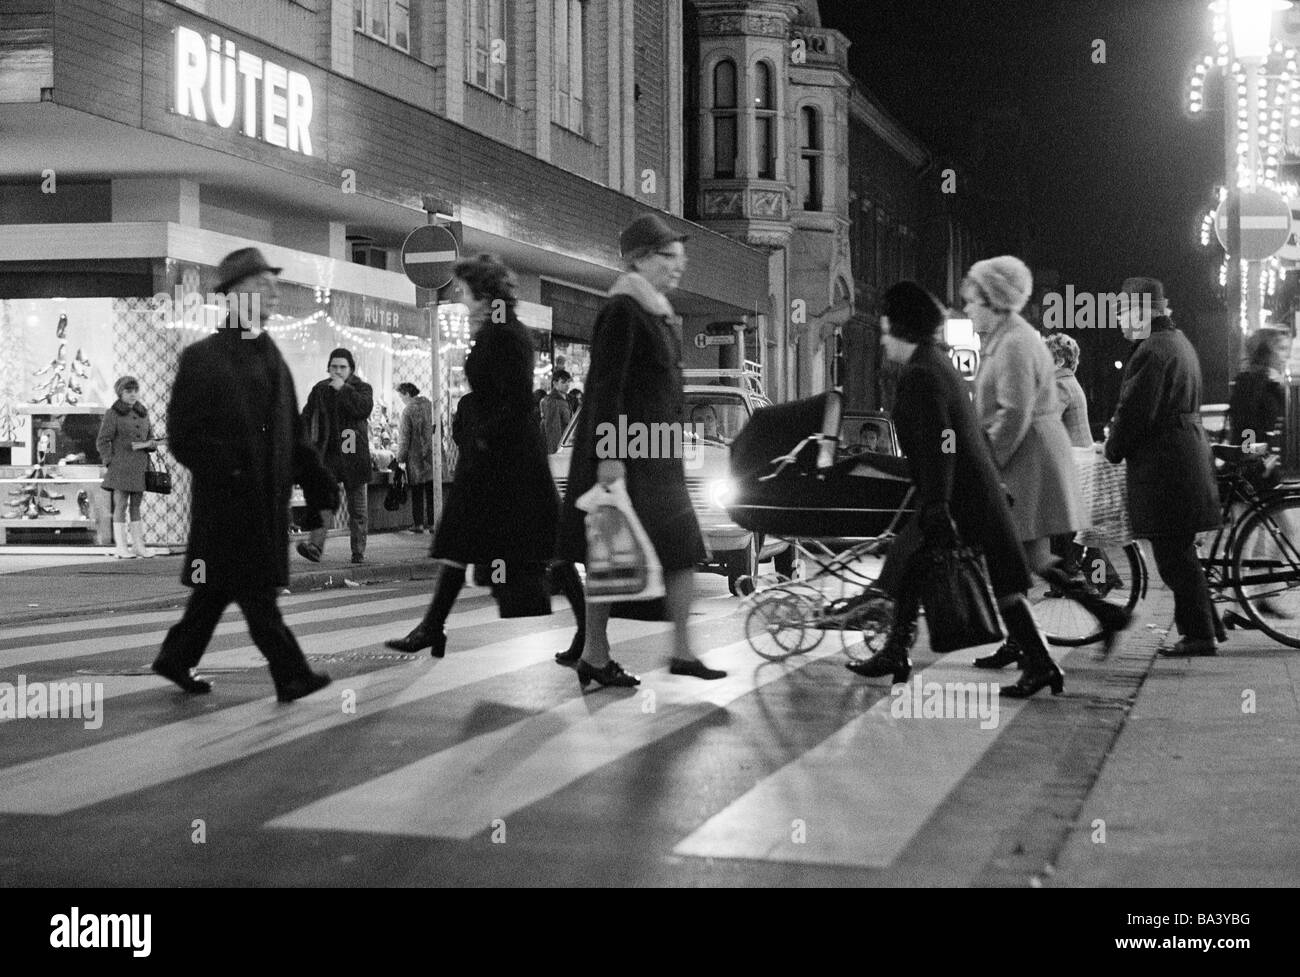 Seventies, black and white photo, people on shopping expedition, shopping street, pedestrian zone, zebra crossing, evening, illuminated, Market Street, D-Oberhausen, Ruhr area, North Rhine-Westphalia Stock Photo